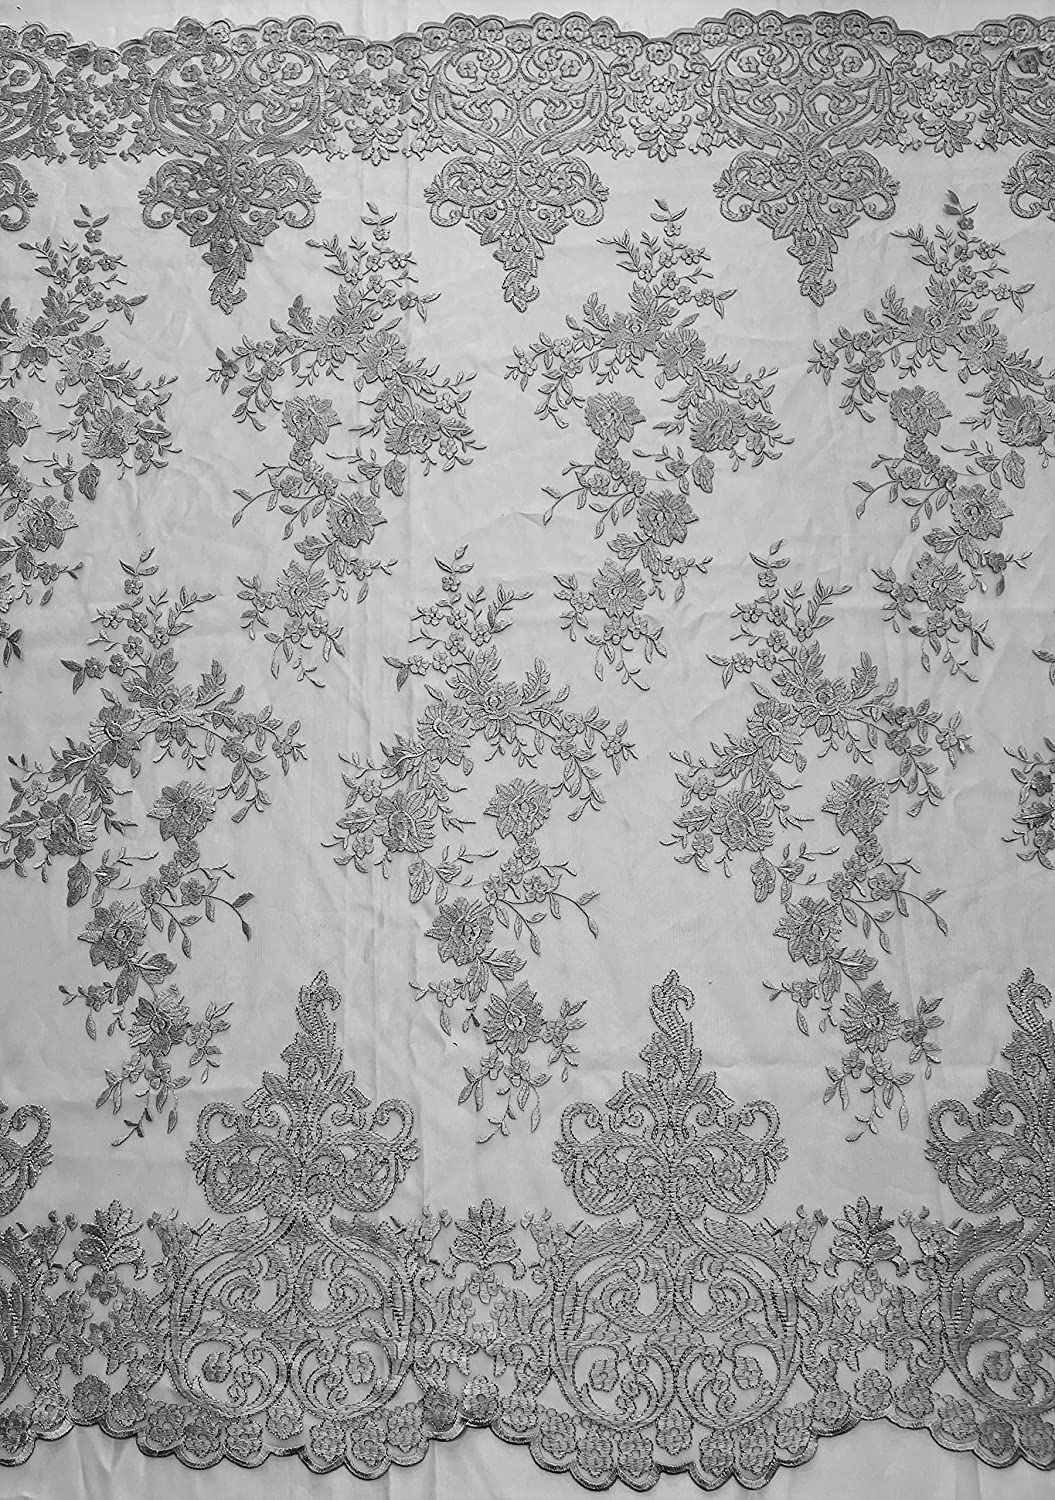 54" Wide Elegant Flower Damask Flat Lace Embroidery On A Mesh (1 Yard, Silver/Grey)